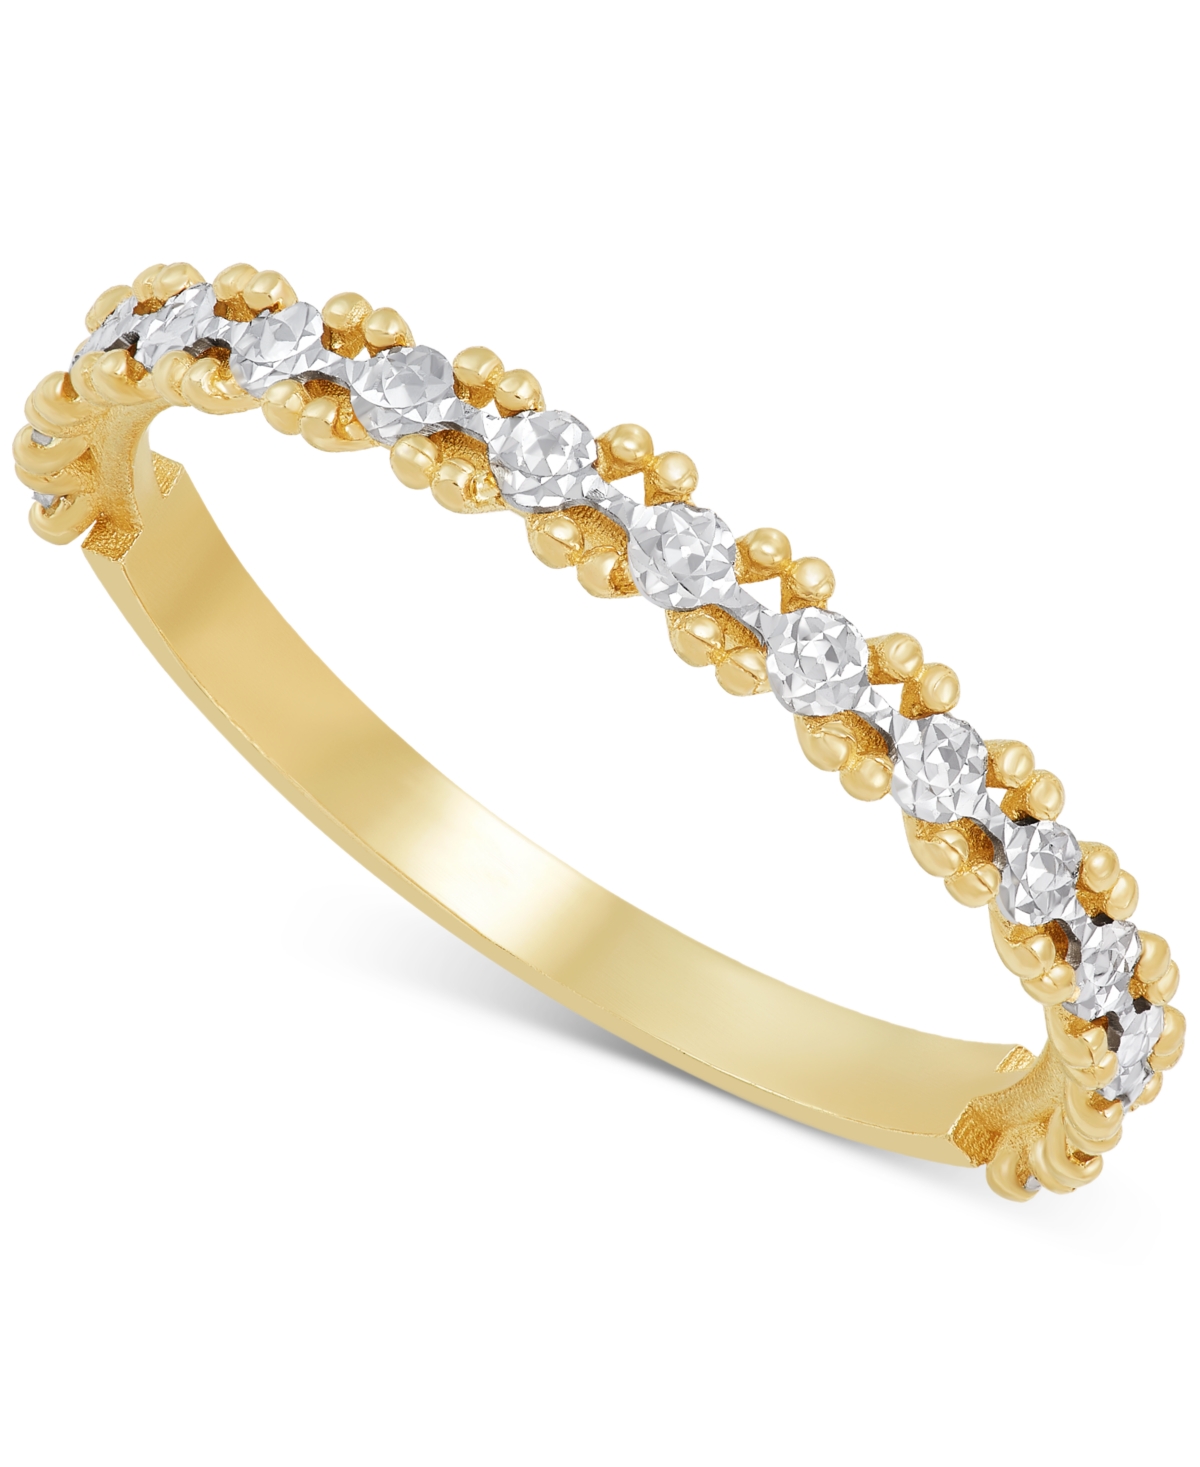 Italian Gold Textured Illusion Narrow Stack Ring In 10k Two-tone Gold, Created For Macy's